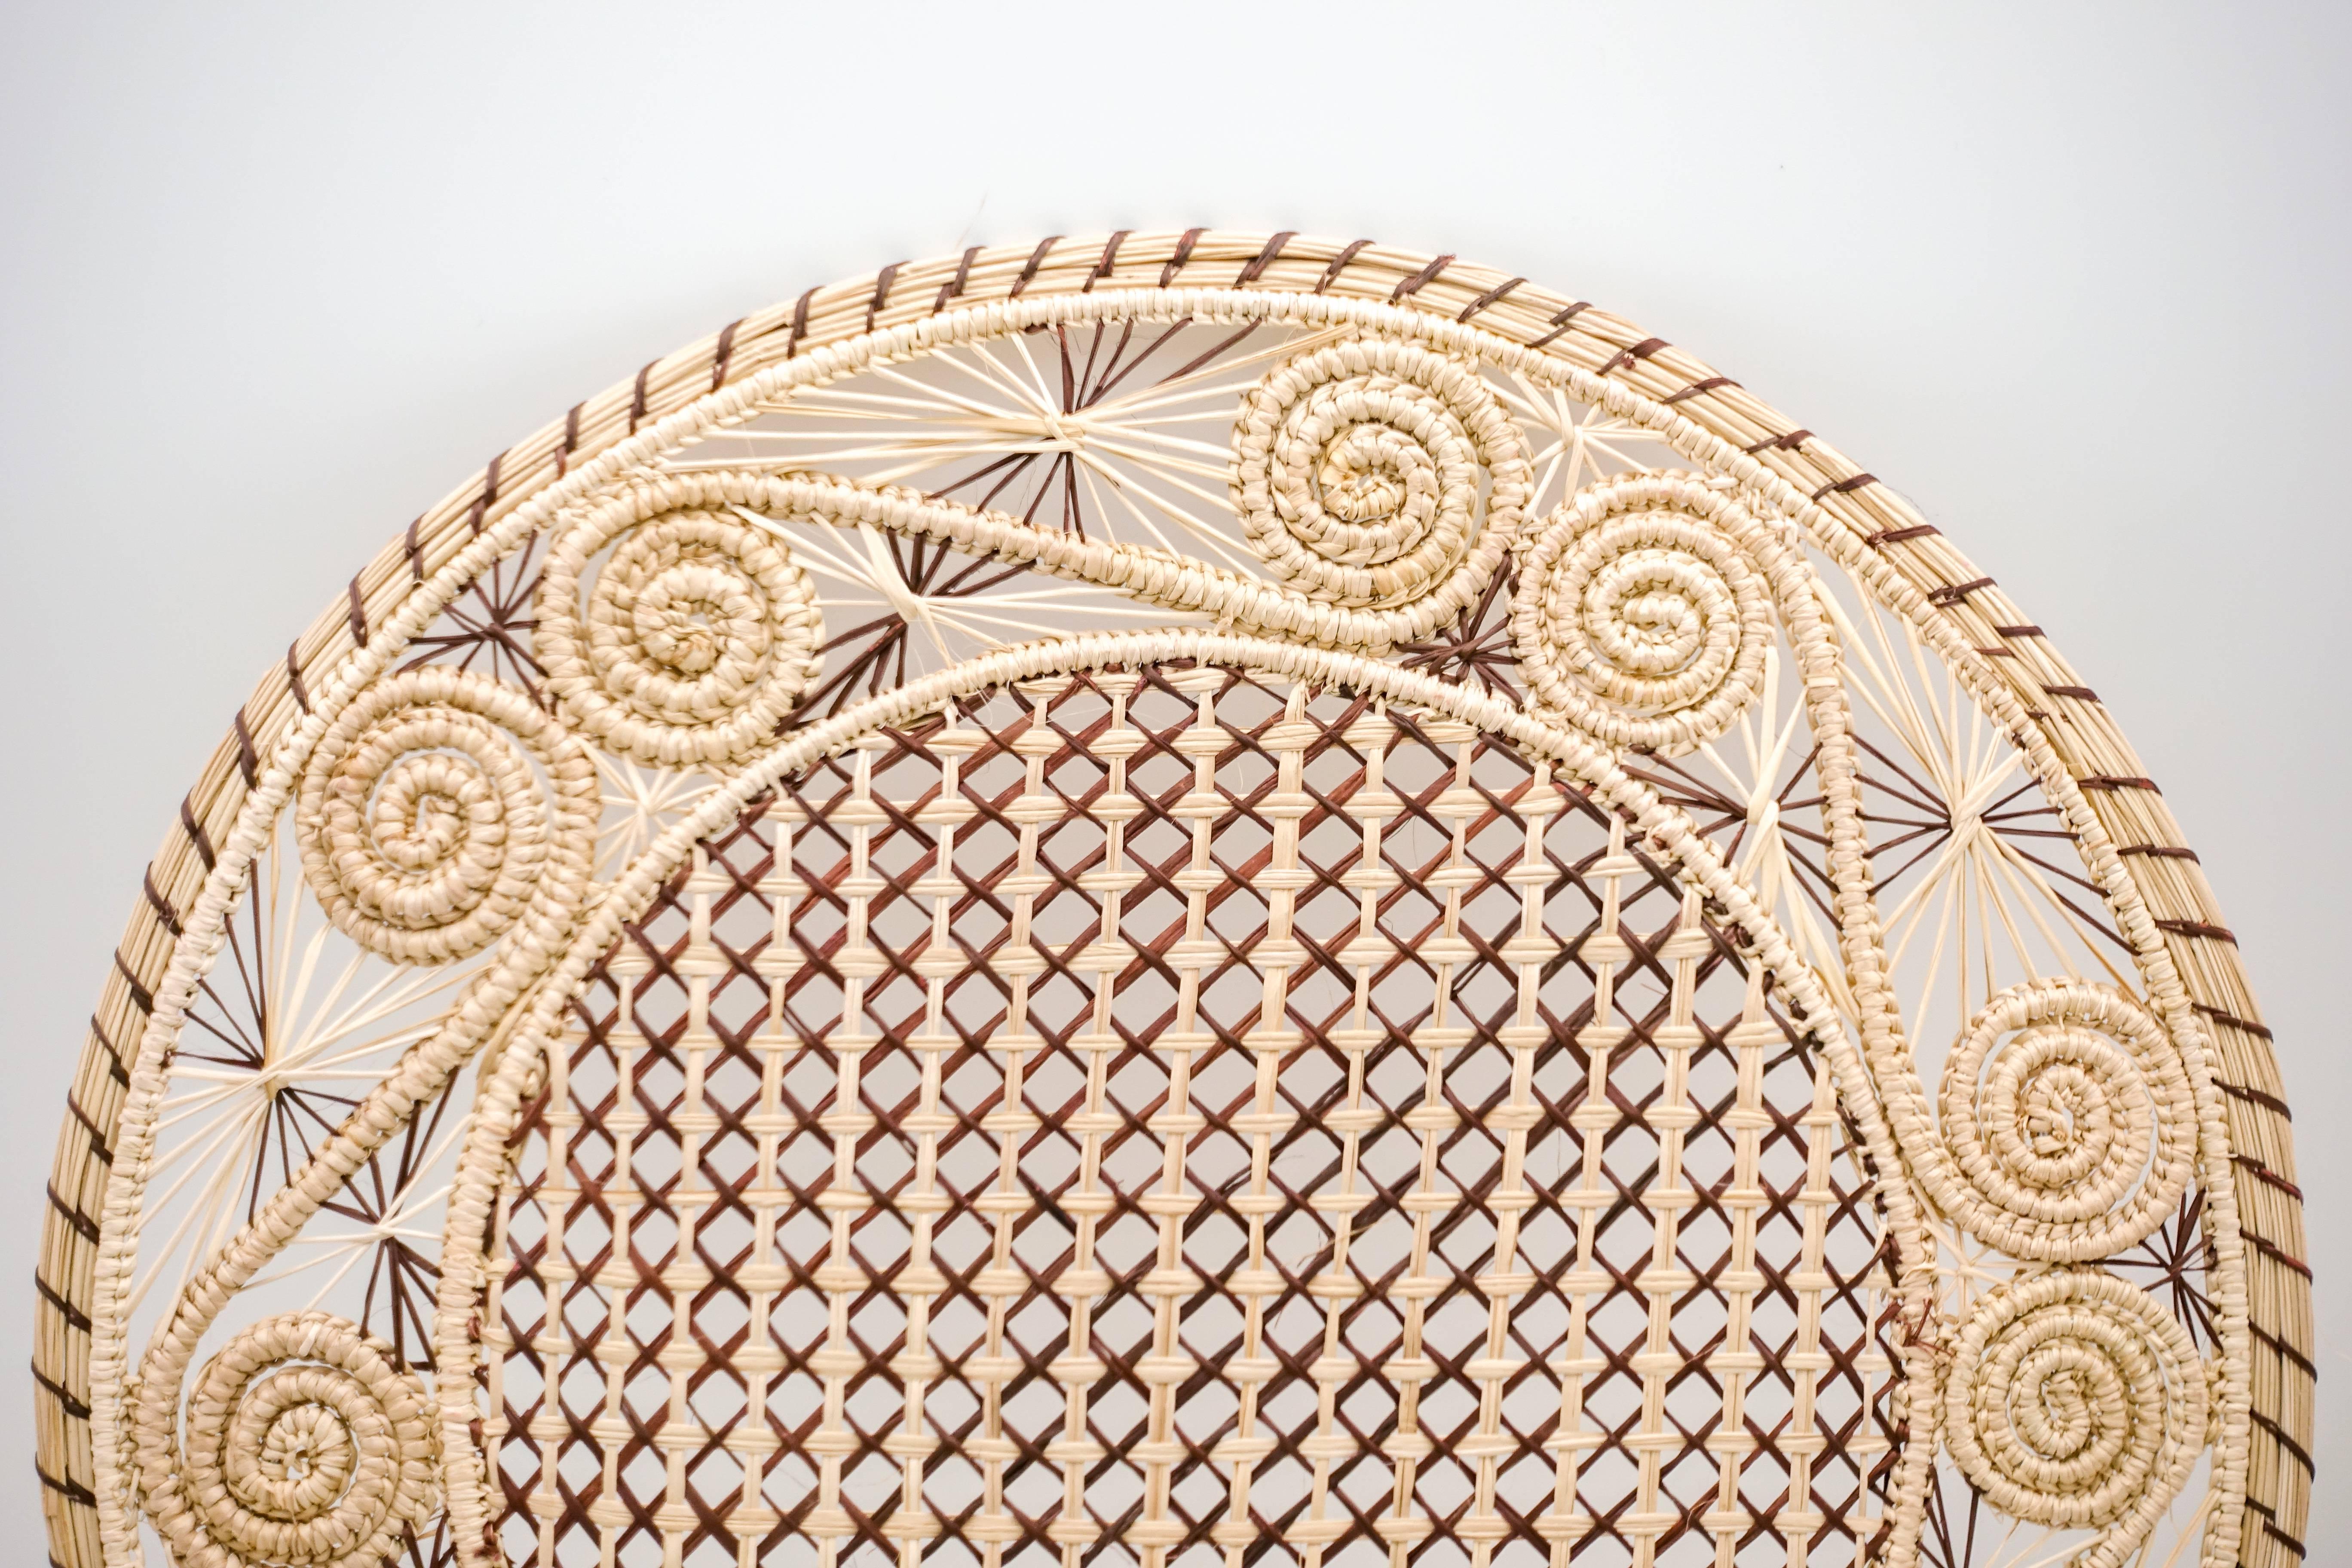 Handwoven Iraca fibre placemat(s) made in Columbia. Available individually or in quantity.